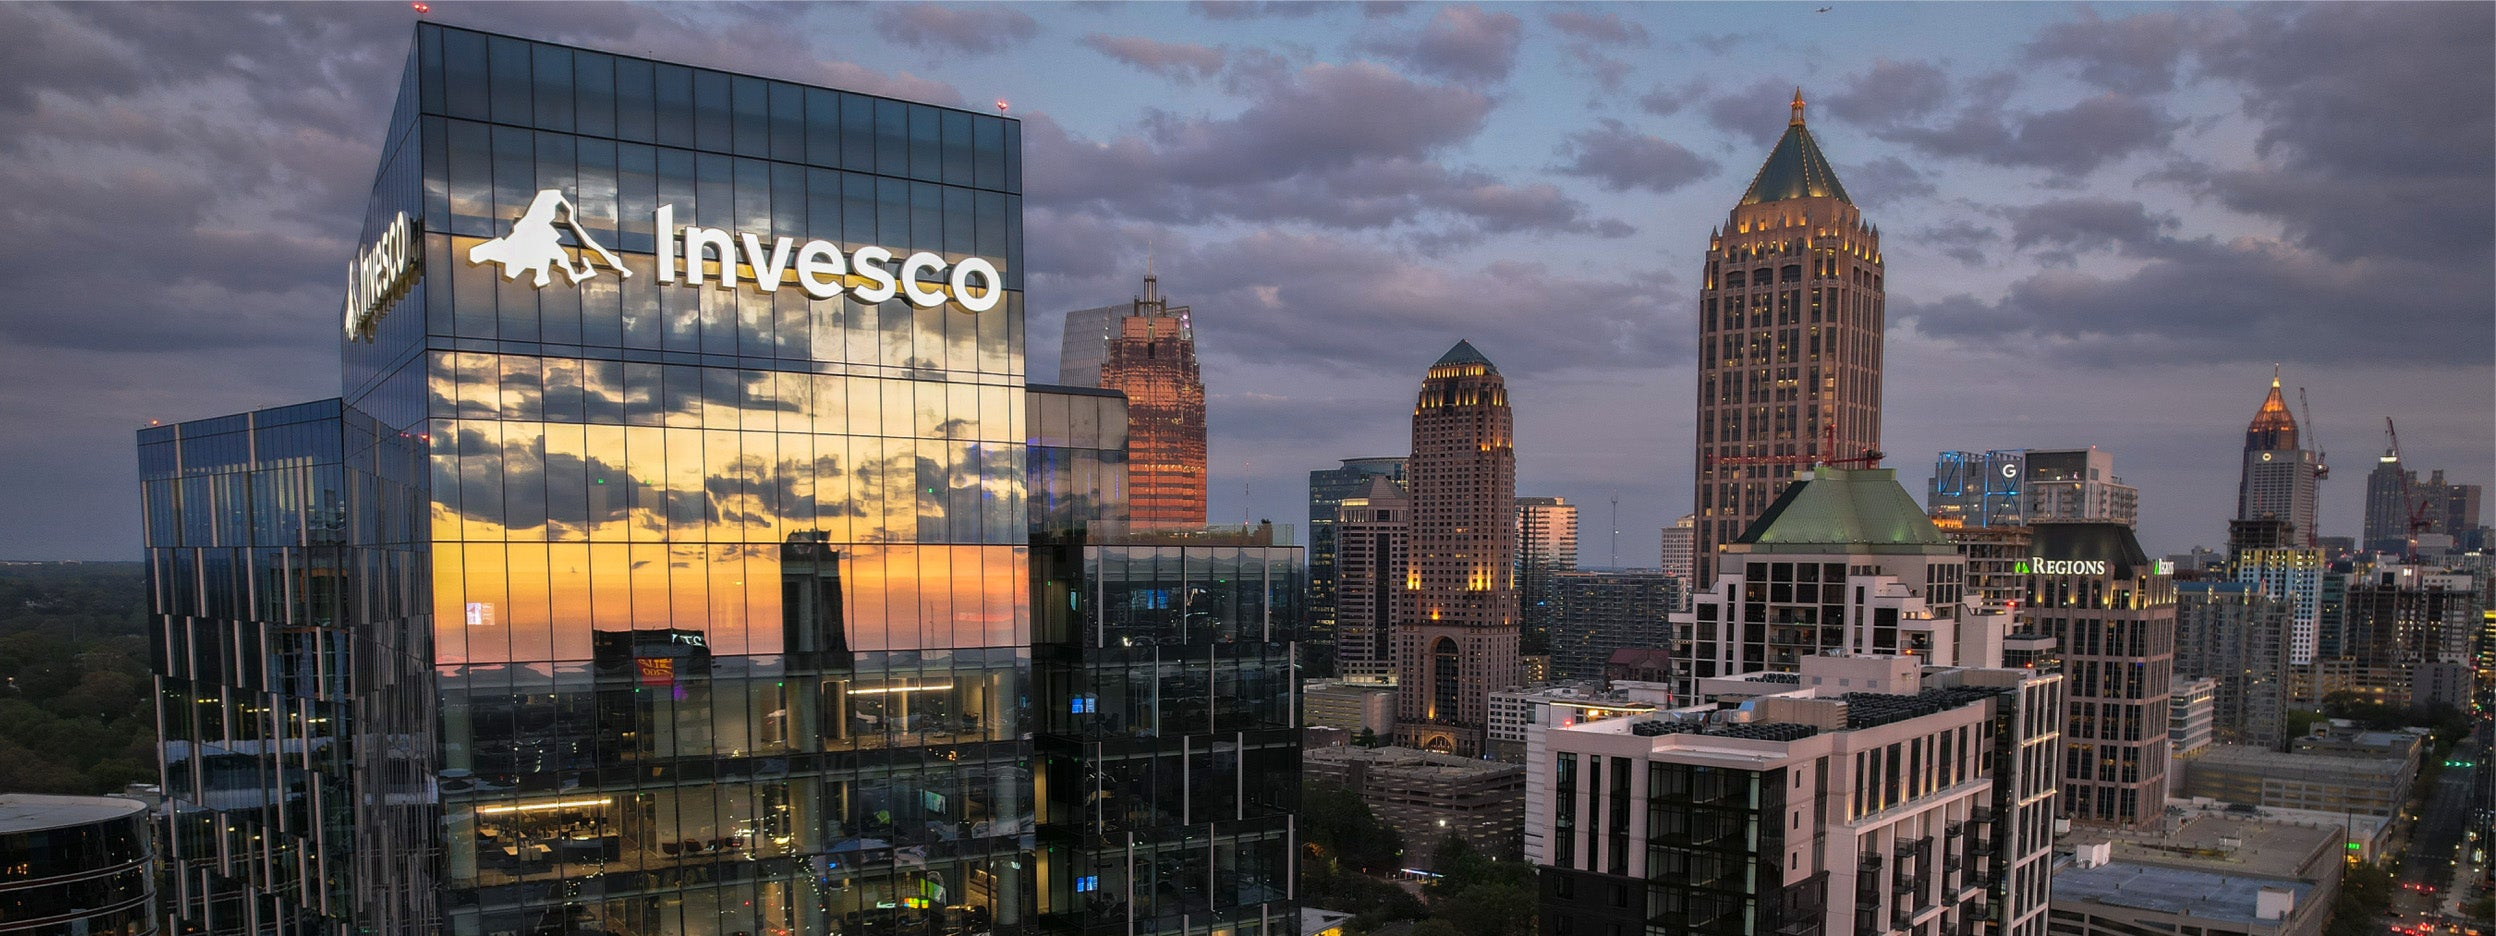 Atlanta skyline view with Invesco's headquarters in foreground